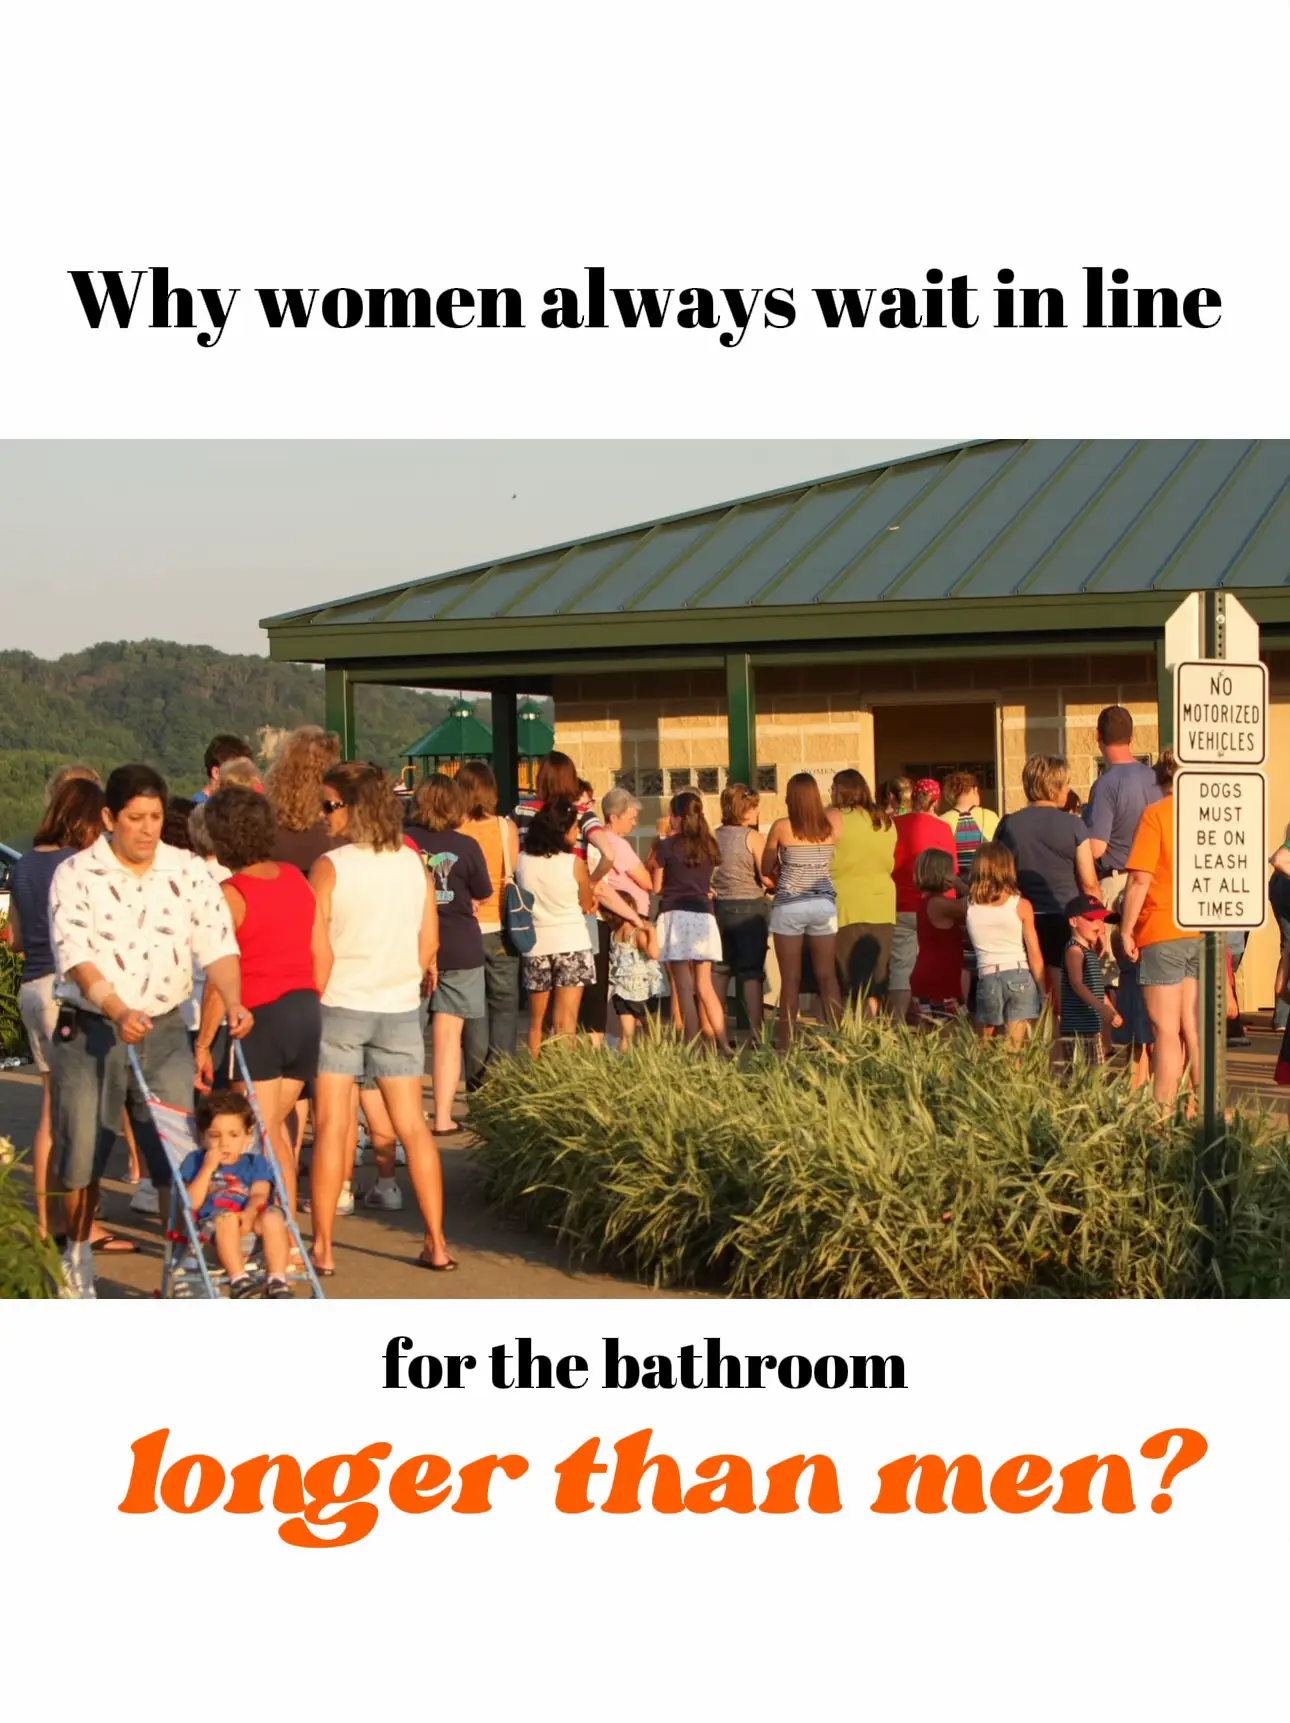 Why Women Have to Wait in Longer Bathroom Lines Than Men Do - The